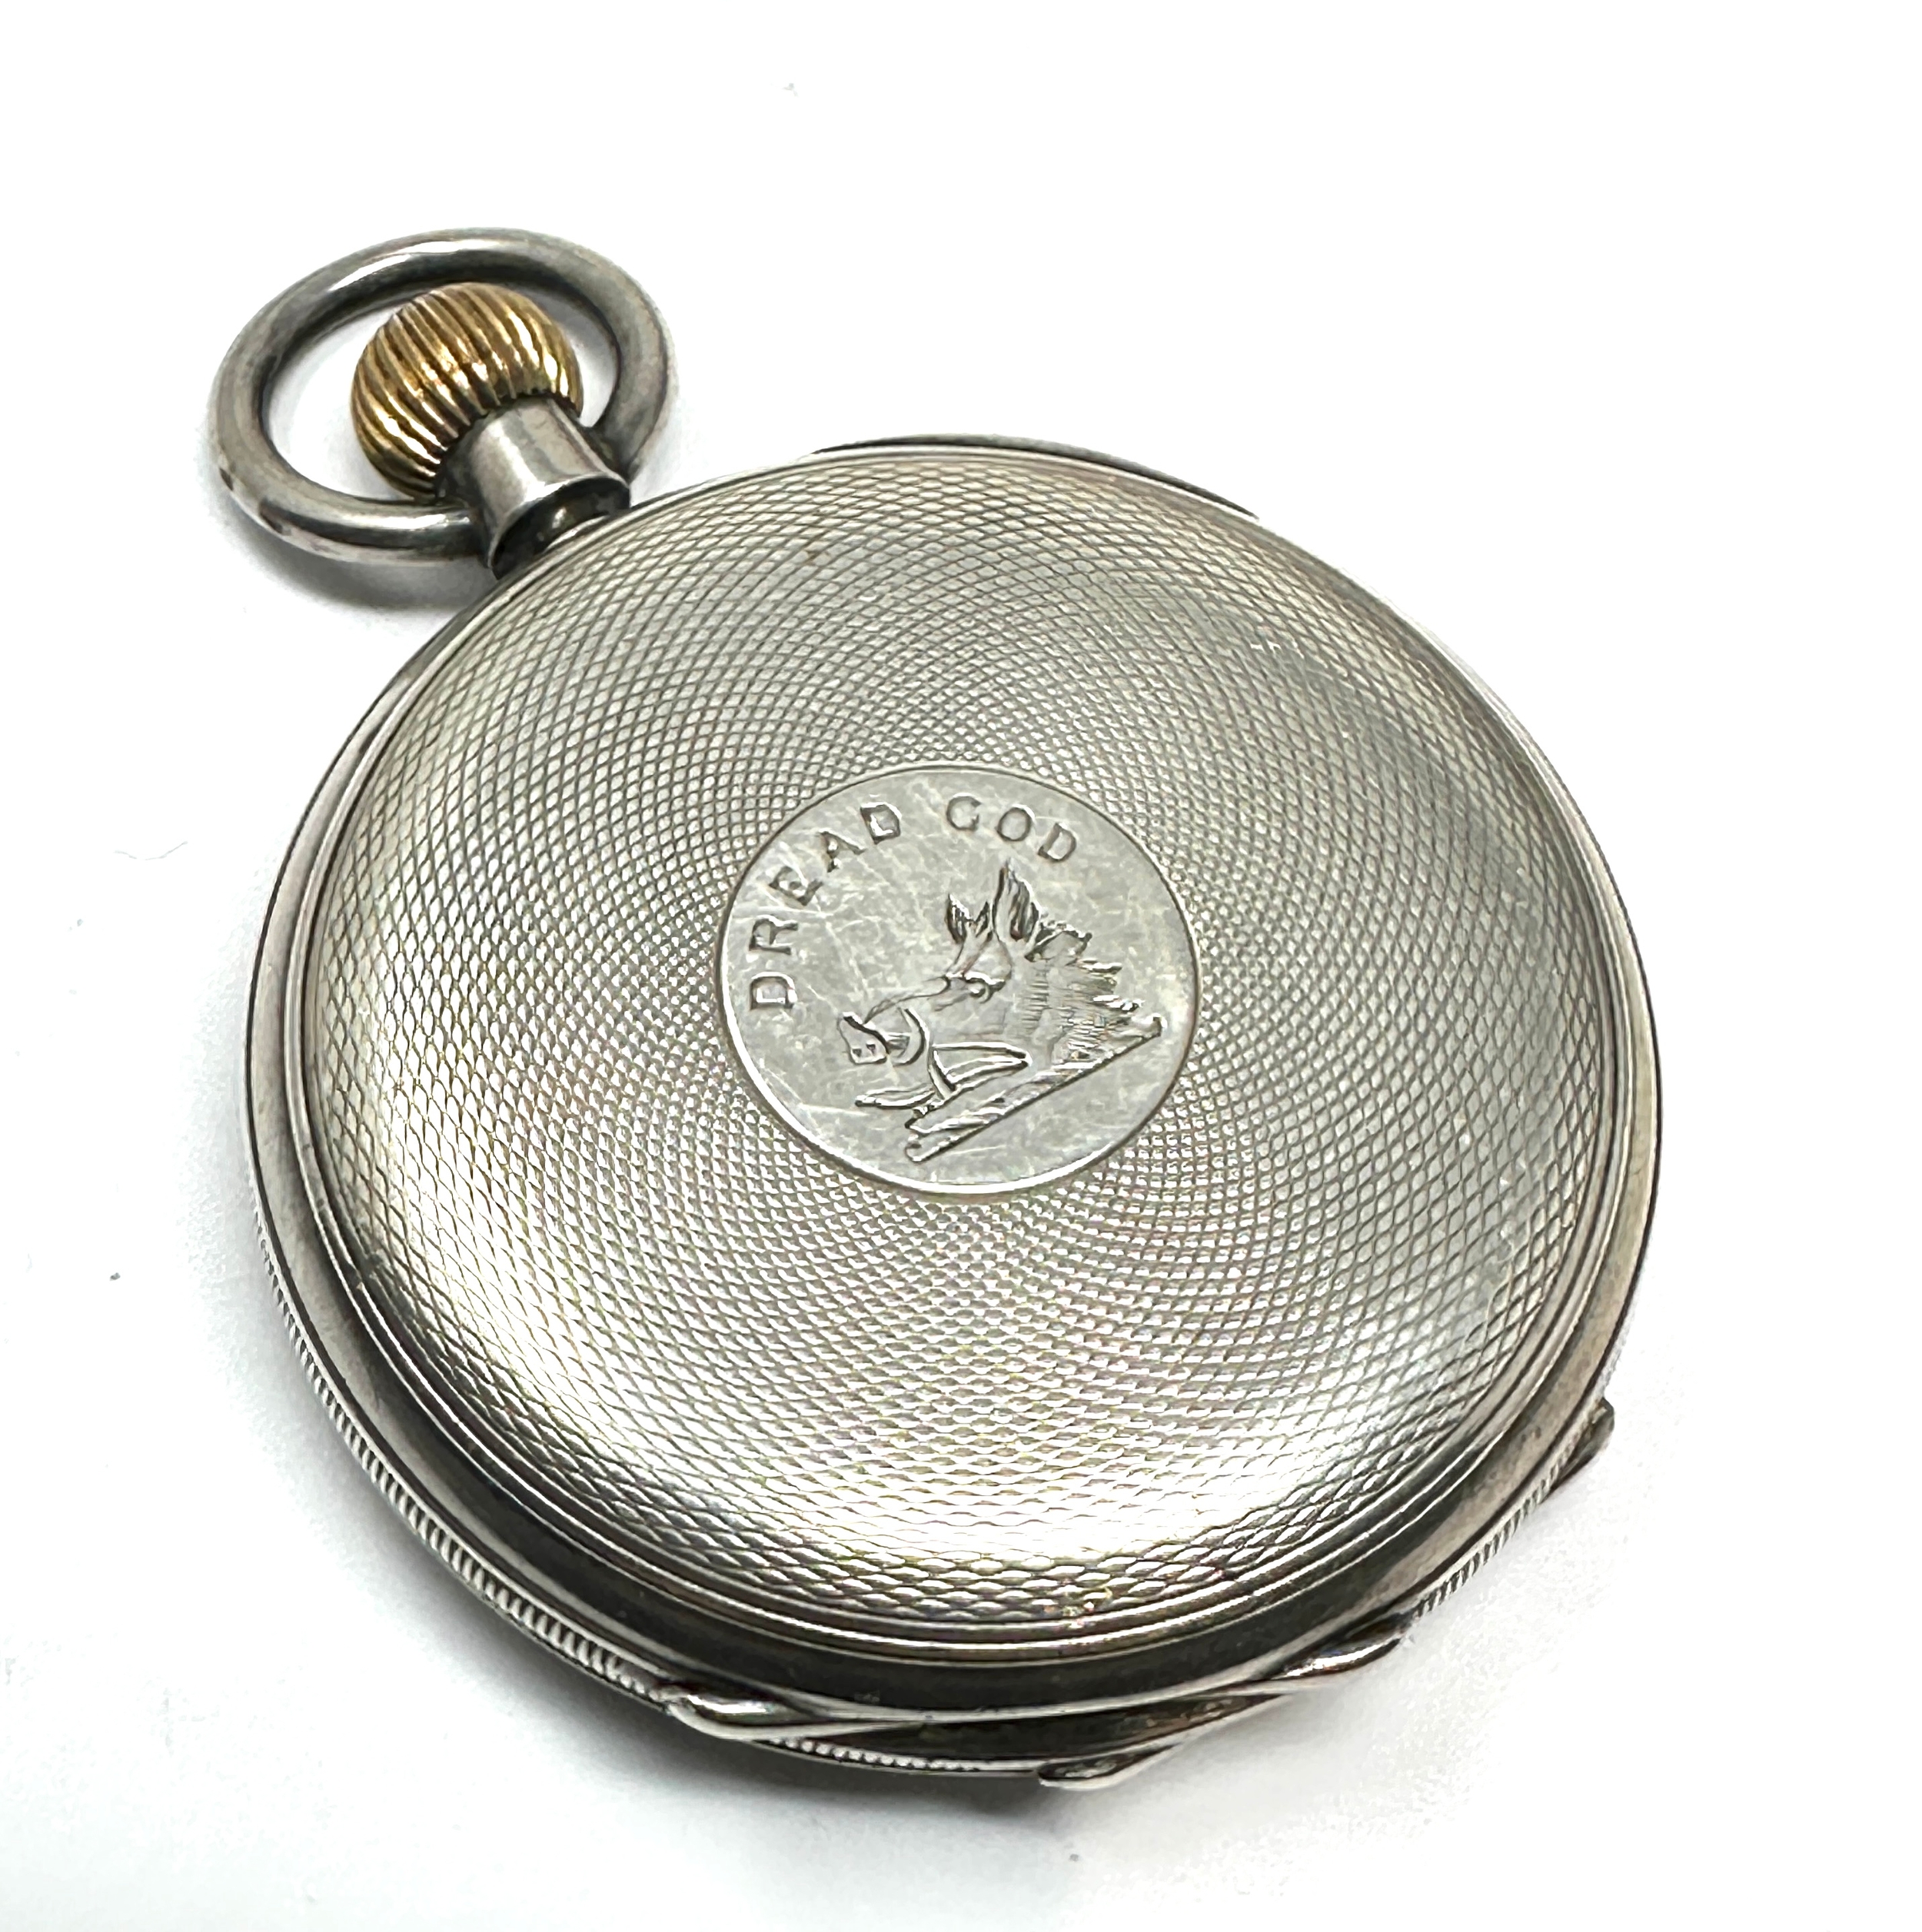 Antique silver half hunter pocket watch the watch is not ticking - Image 3 of 4